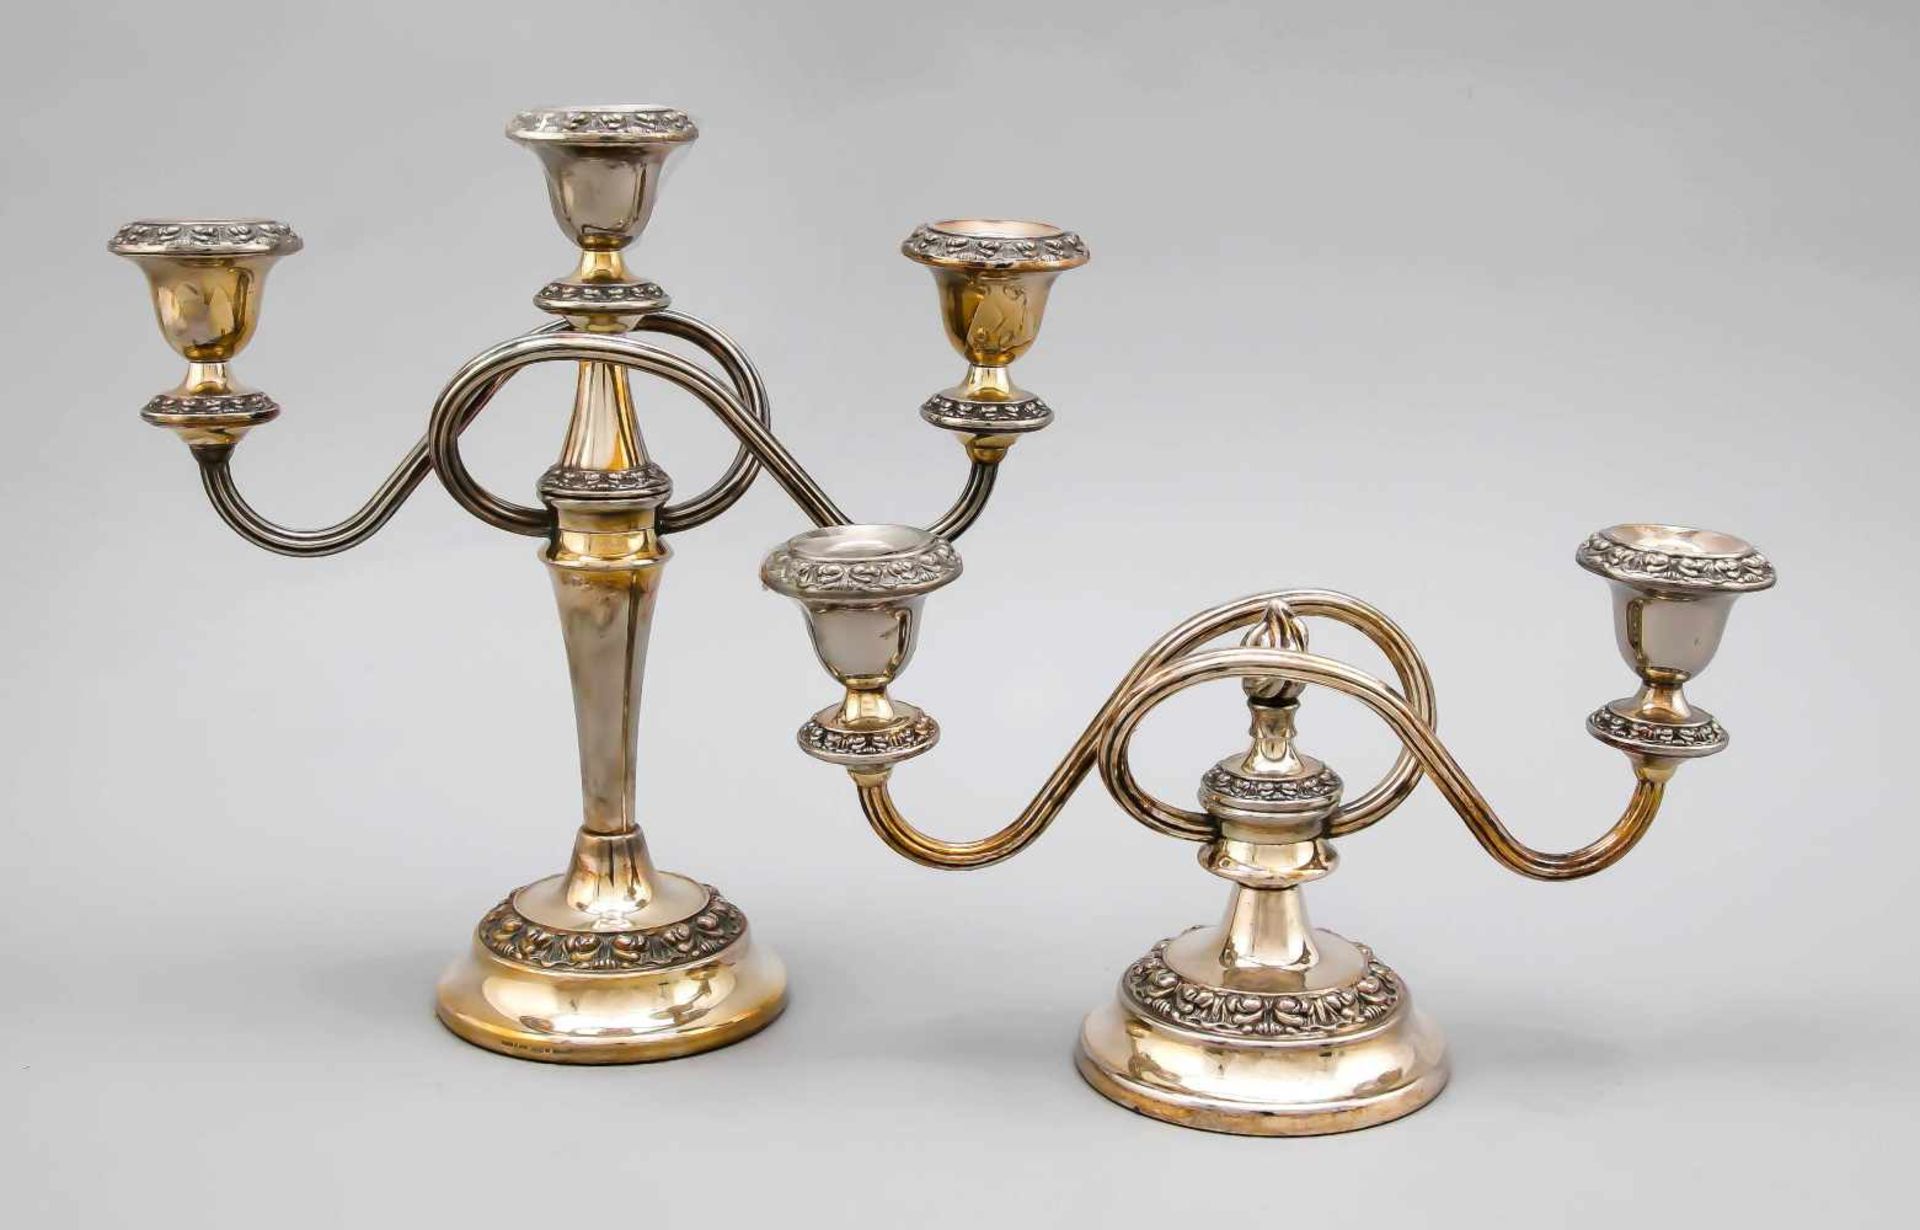 Two candlesticks, England, 20th century, plated, round domed and filled stand, 1 conicalshaft, 1